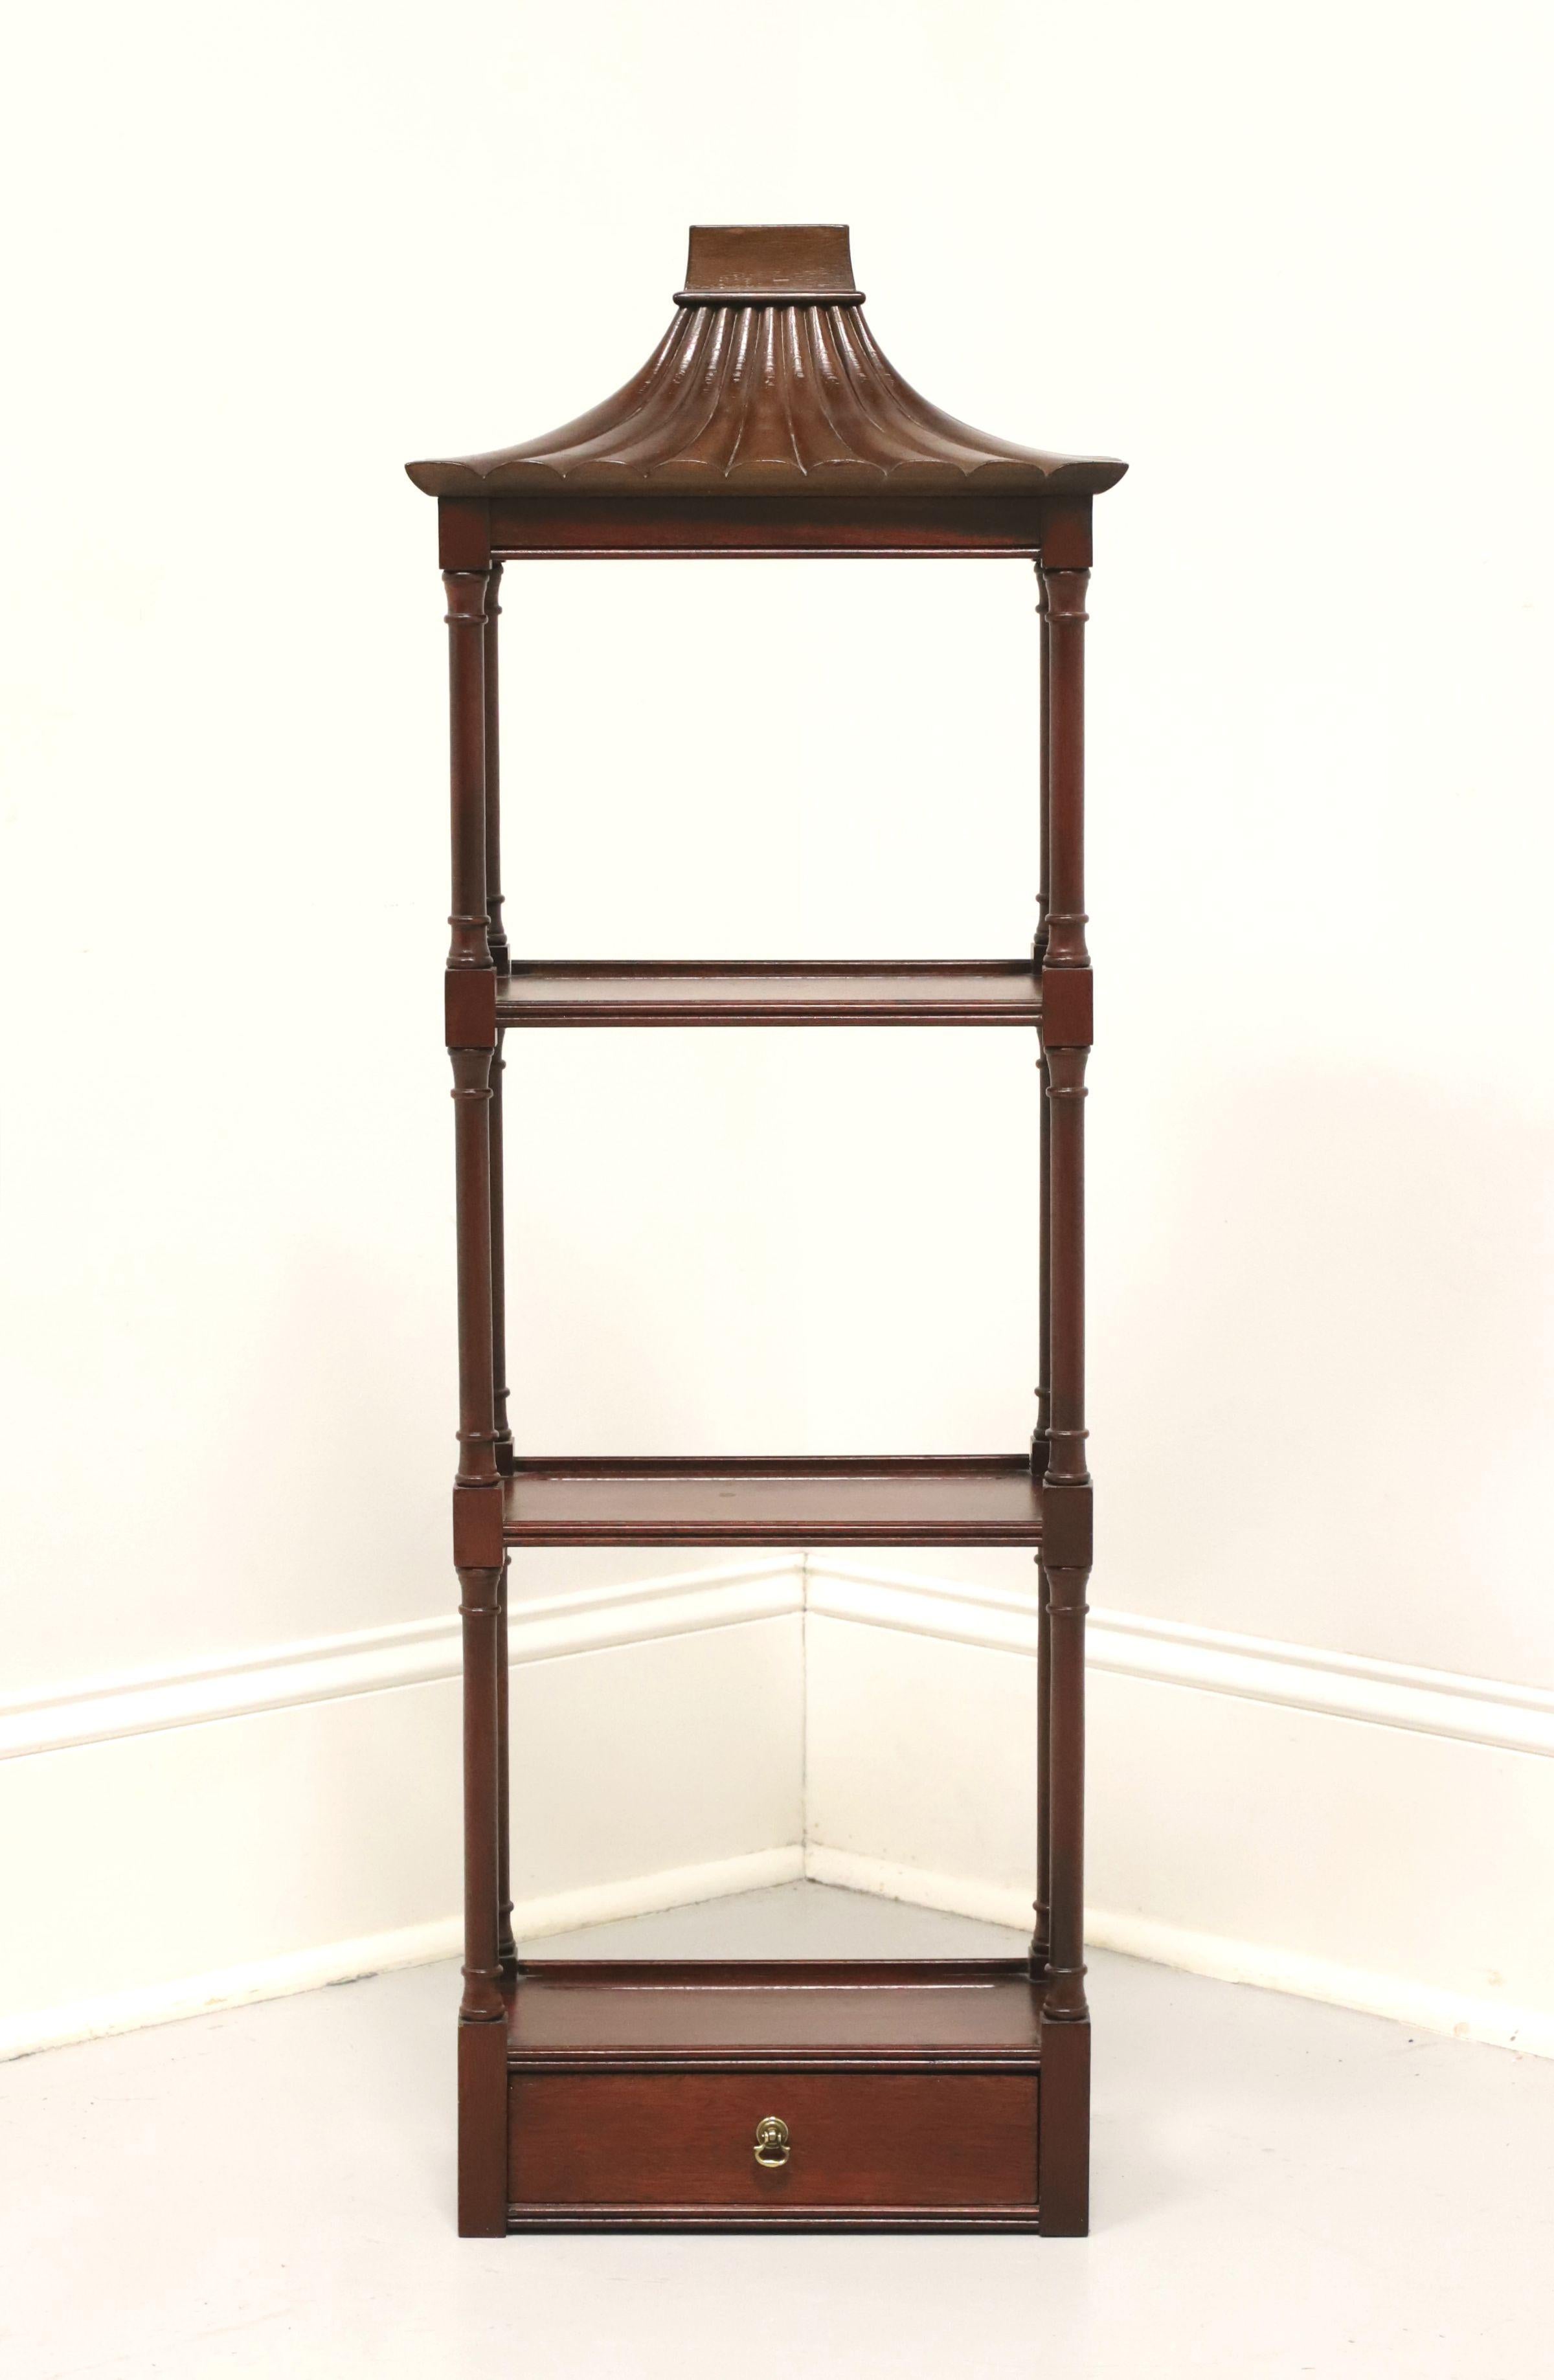 An Asian Japanese style hanging display wall shelf by Southampton. Solid mahogany with brass hardware, three flat display surfaces with low lip, pagoda like top, open column like sides and one drawer at the base. Dual brass hangers on back for wall